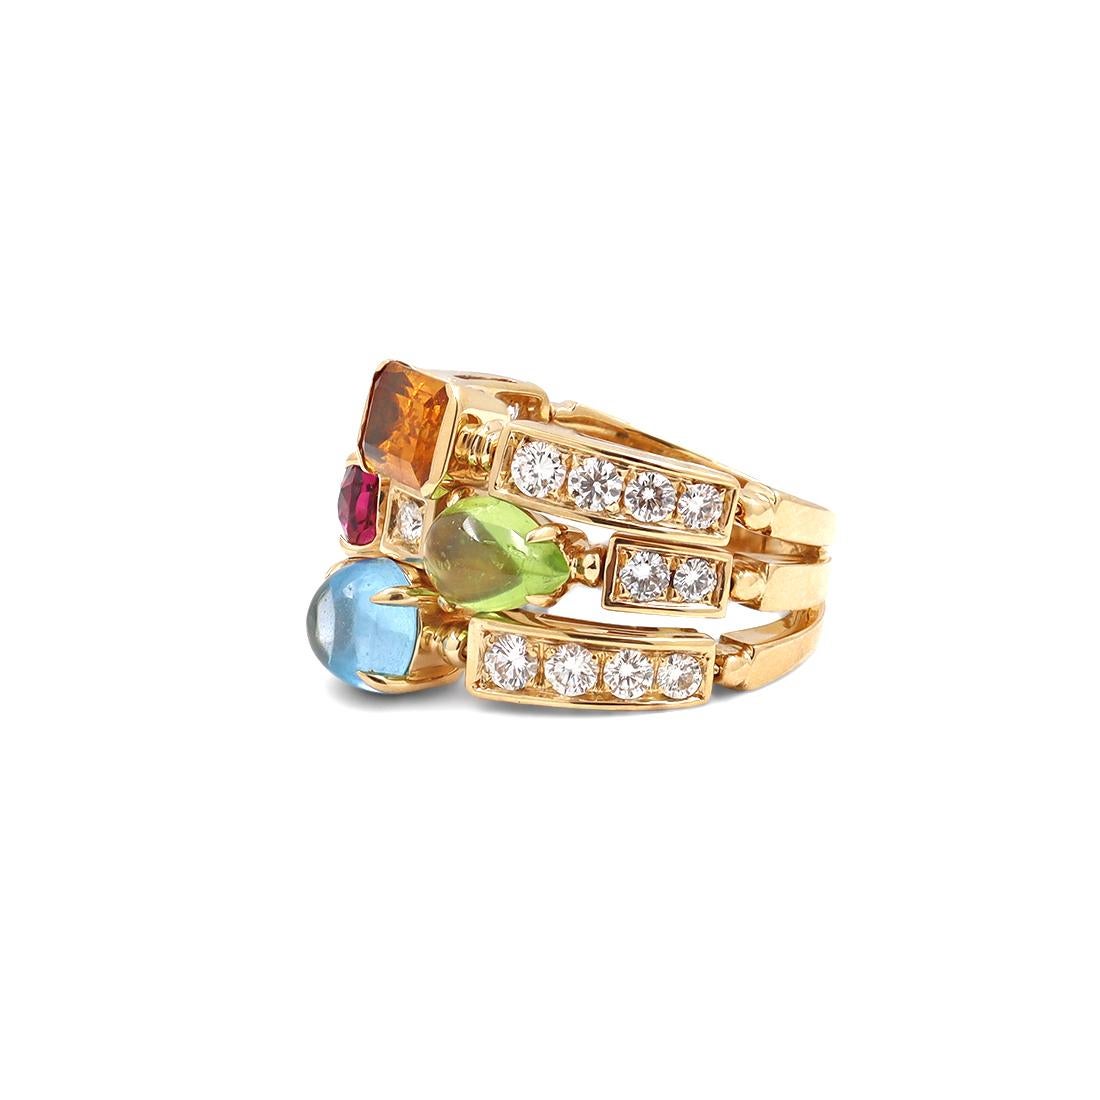 Authentic Bvlgari Allegra ring crafted in 18 karat yellow gold. The ring consists of three adjacent bands adorned with emerald cut citrine, oval-faceted pink tourmaline, pear shape peridot cabochon and cabochon blue topaz. The ring is complemented